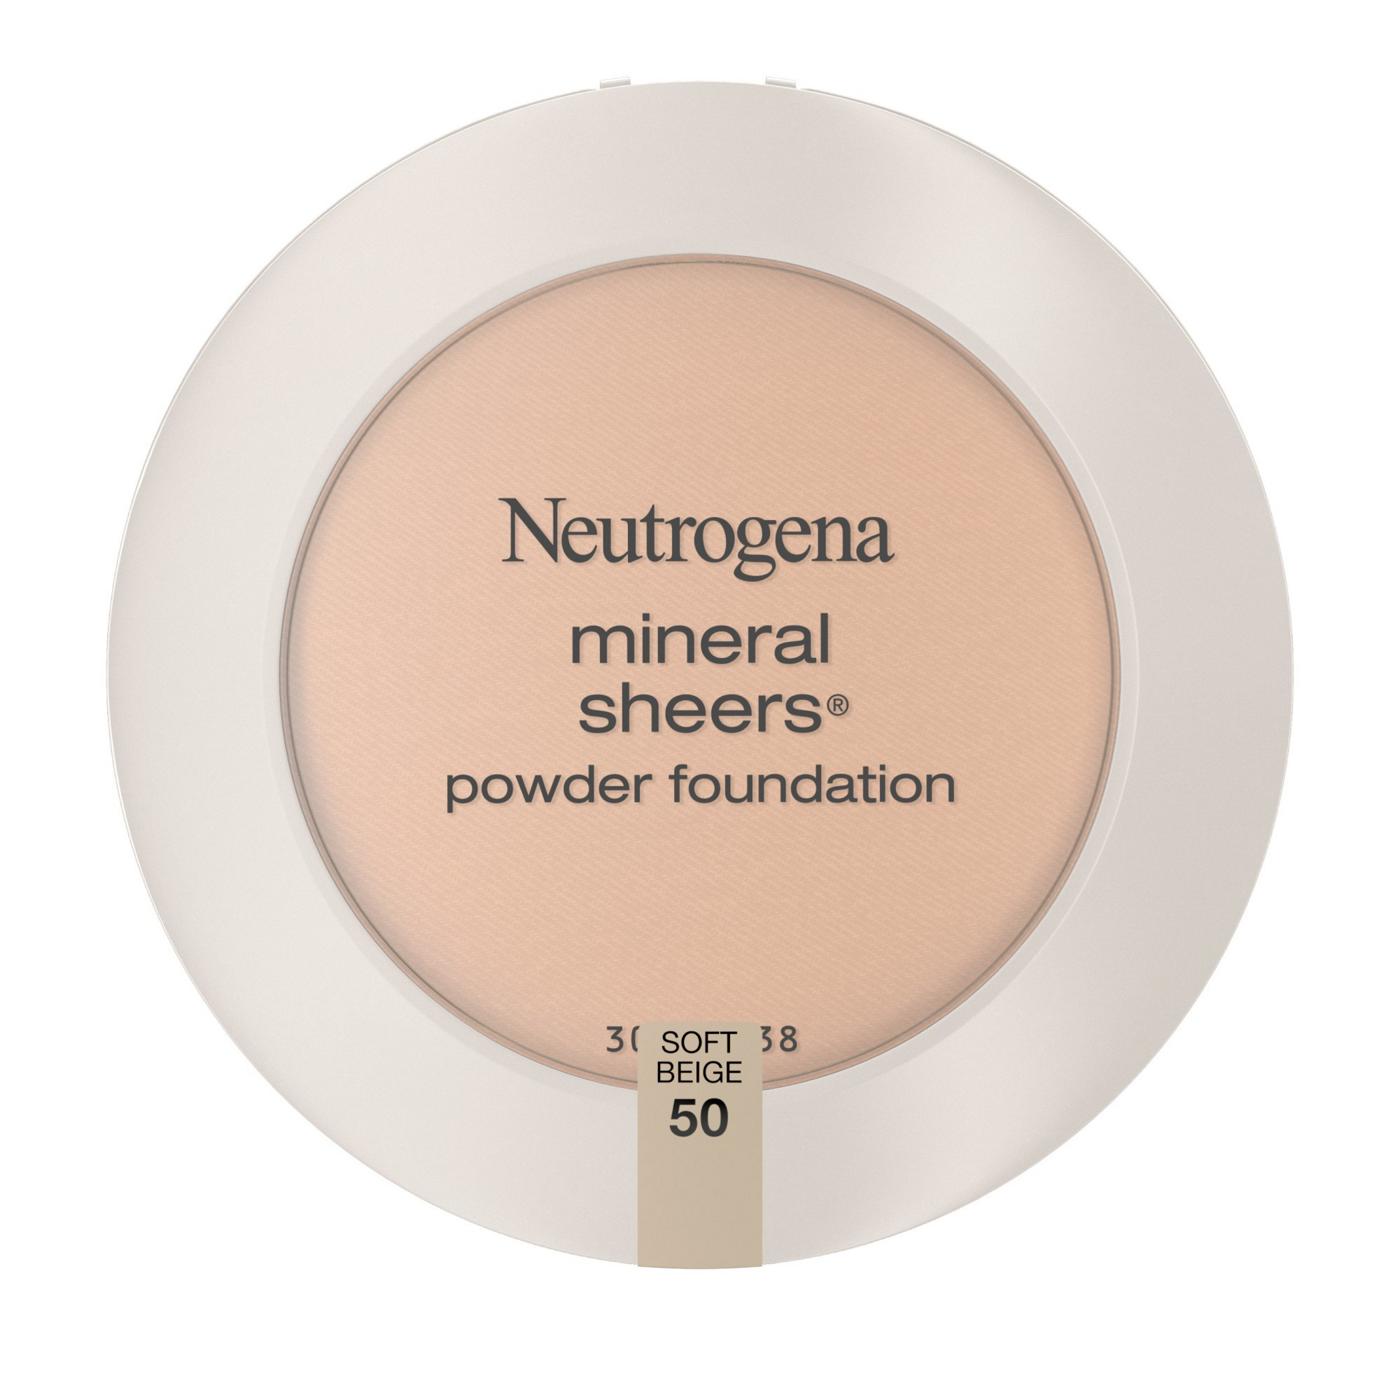 Neutrogena Mineral Sheers Compact Powder Foundation 50 Soft Beige; image 1 of 6